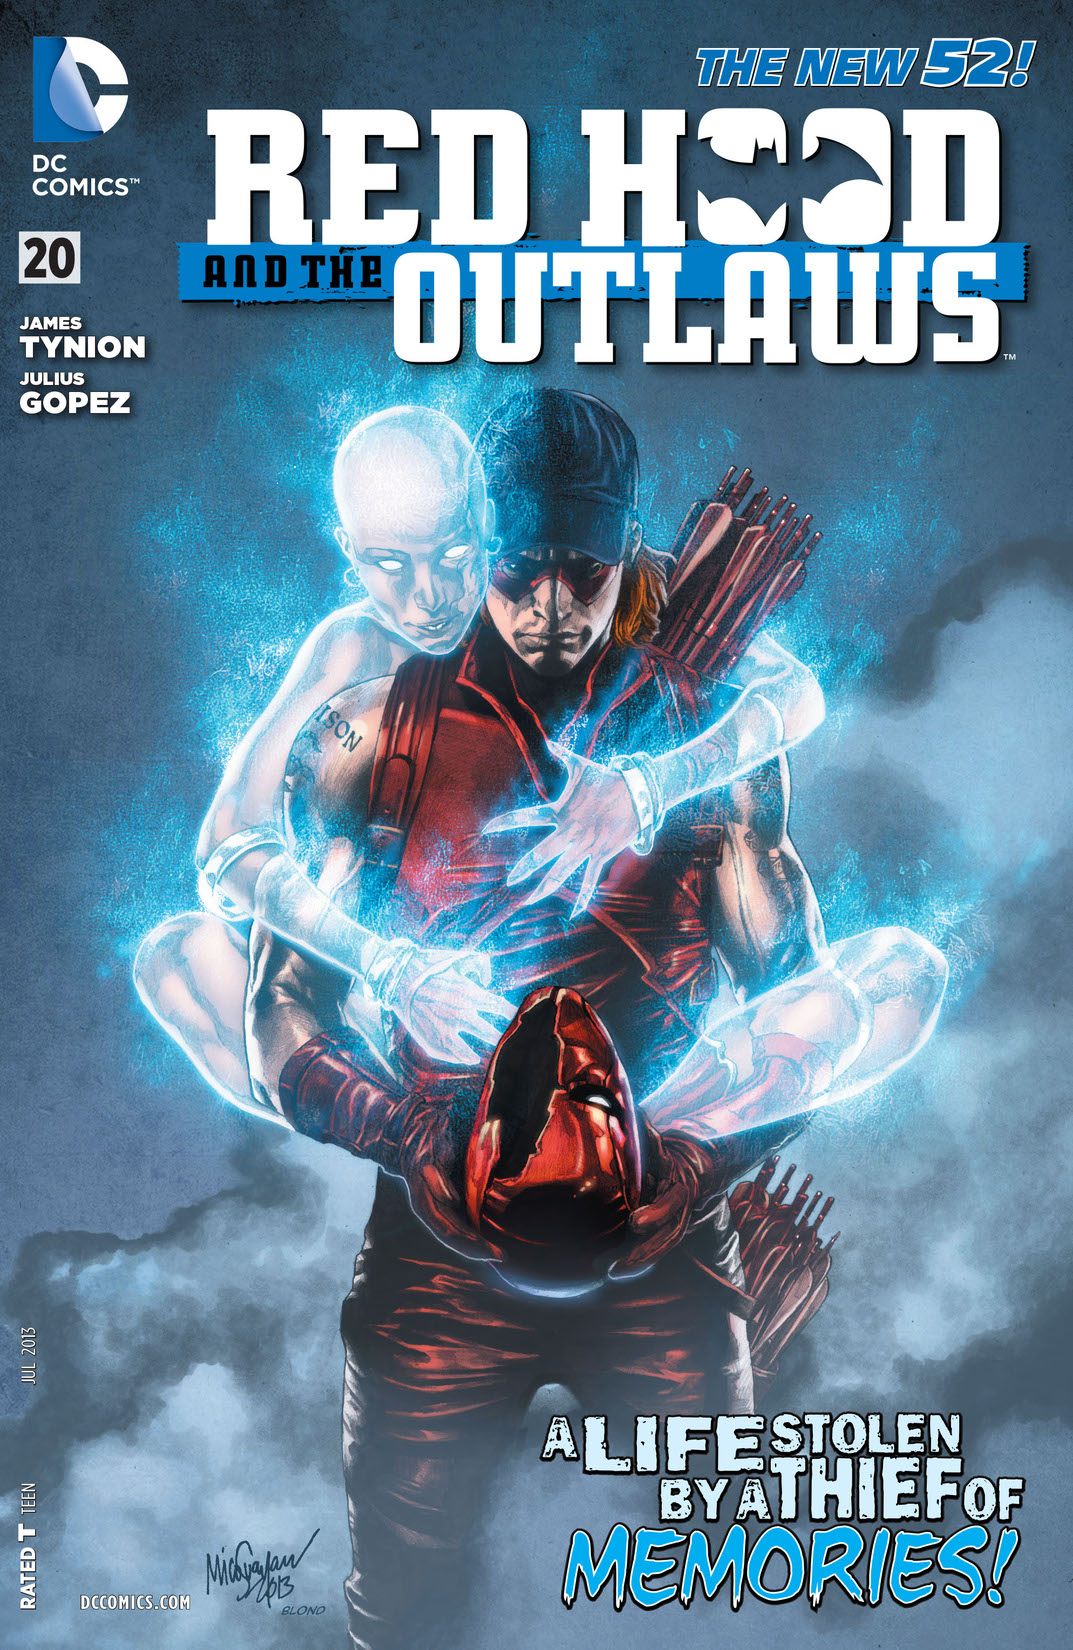 Red Hood and the Outlaws (2011-) #20 preview images